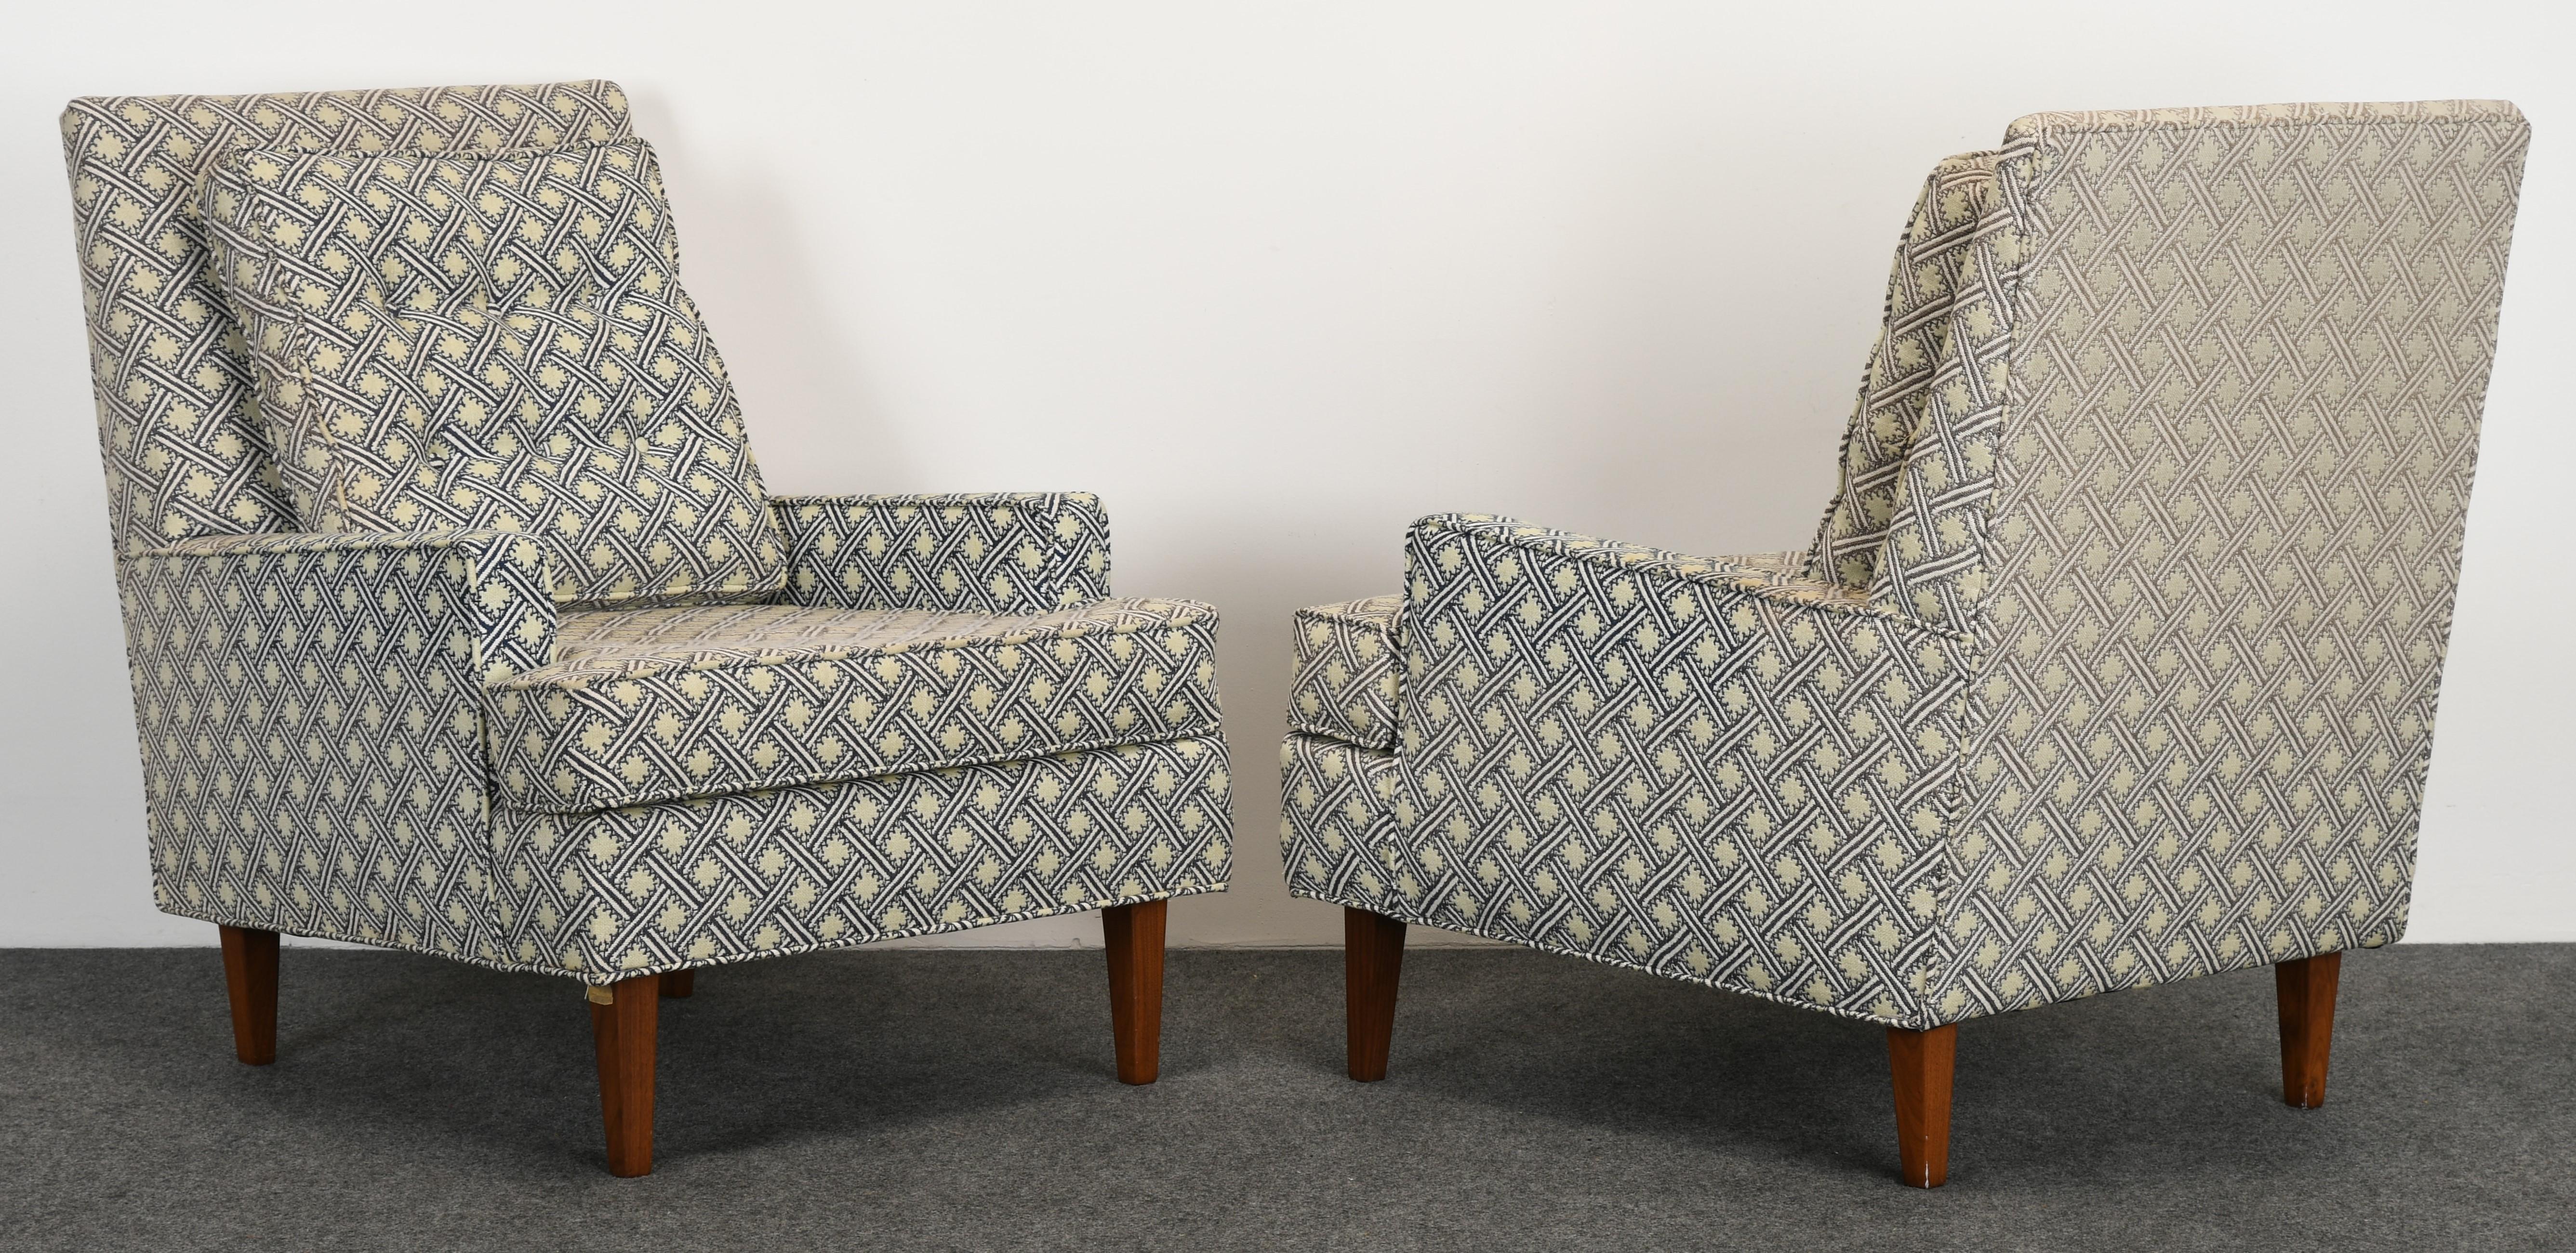 A modern pair of stylish armchairs in the manner of Dunbar or Harvey Probber. These lounge chairs have lots of depth to the frame for added comfort. The fabric is faded, new upholstery necessary. The chairs are structurally sound with